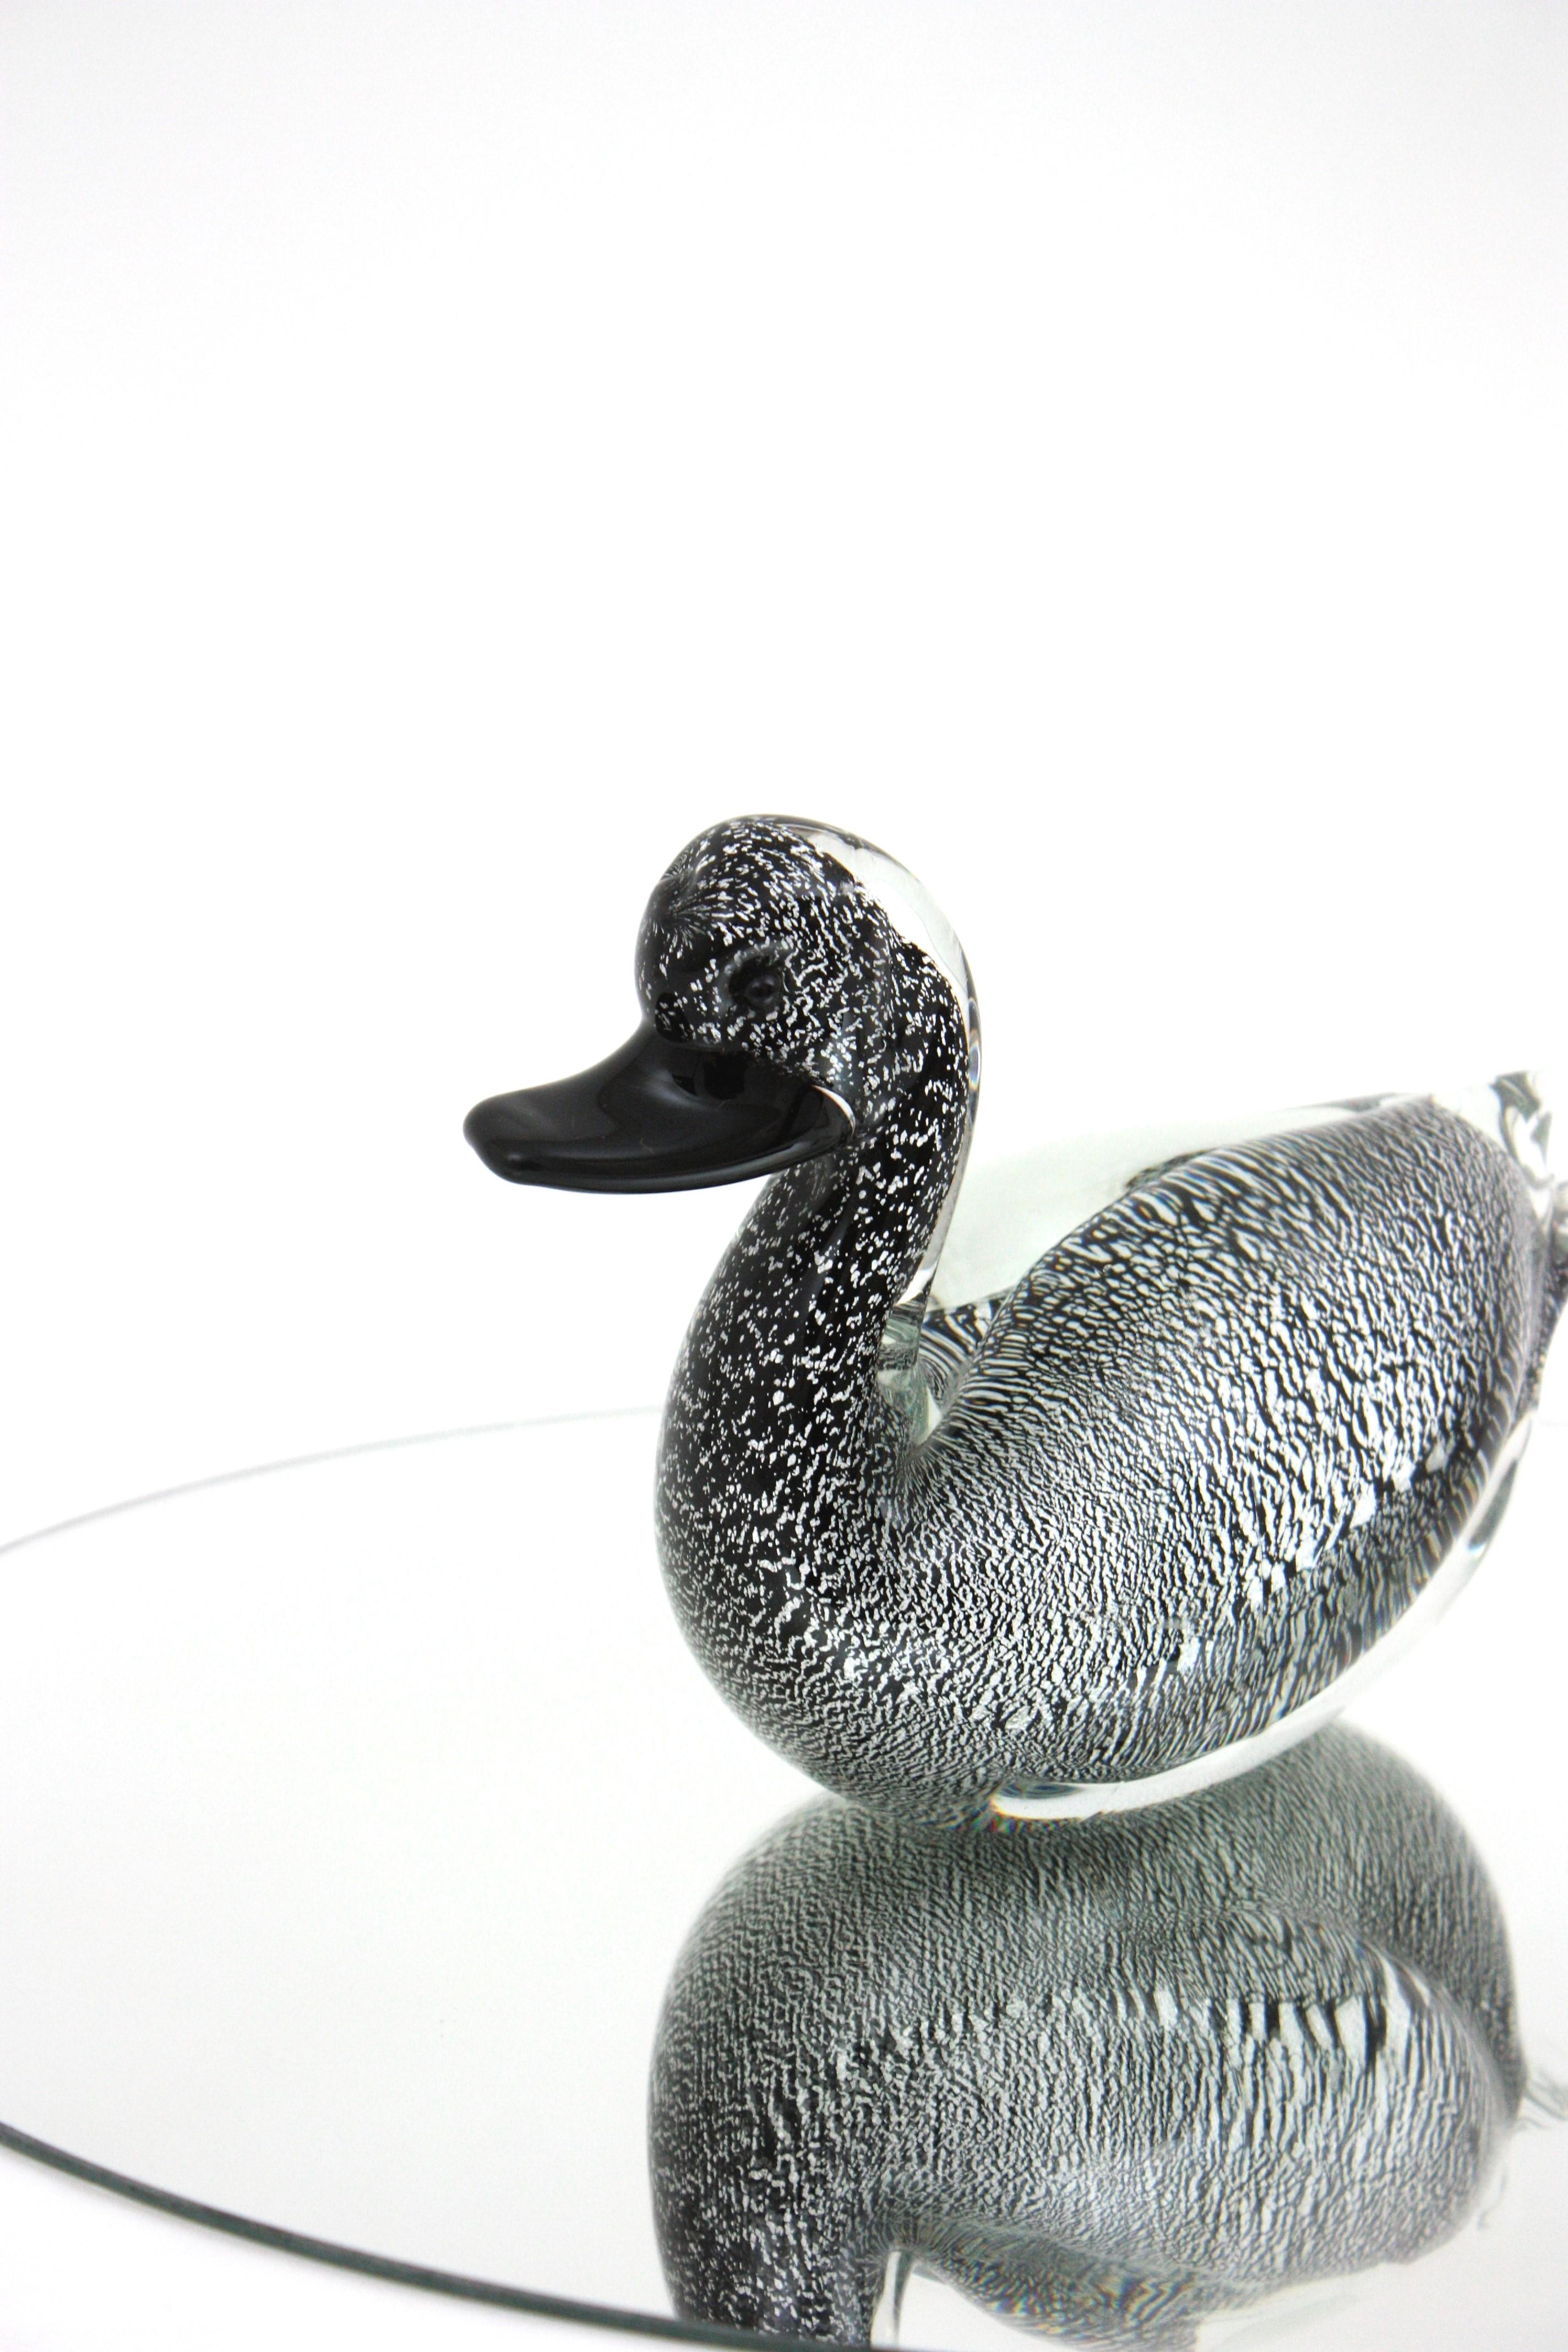 Eye-catching Murano glass duck figure / paperweight / sculpture. Manufactured by Formia Murano, Italy, 1960s.
Black glass and clear glass richly decorated by silver flecks thorough.
Large size.
Mint condition.
Lovely to use as a decorative sculpture